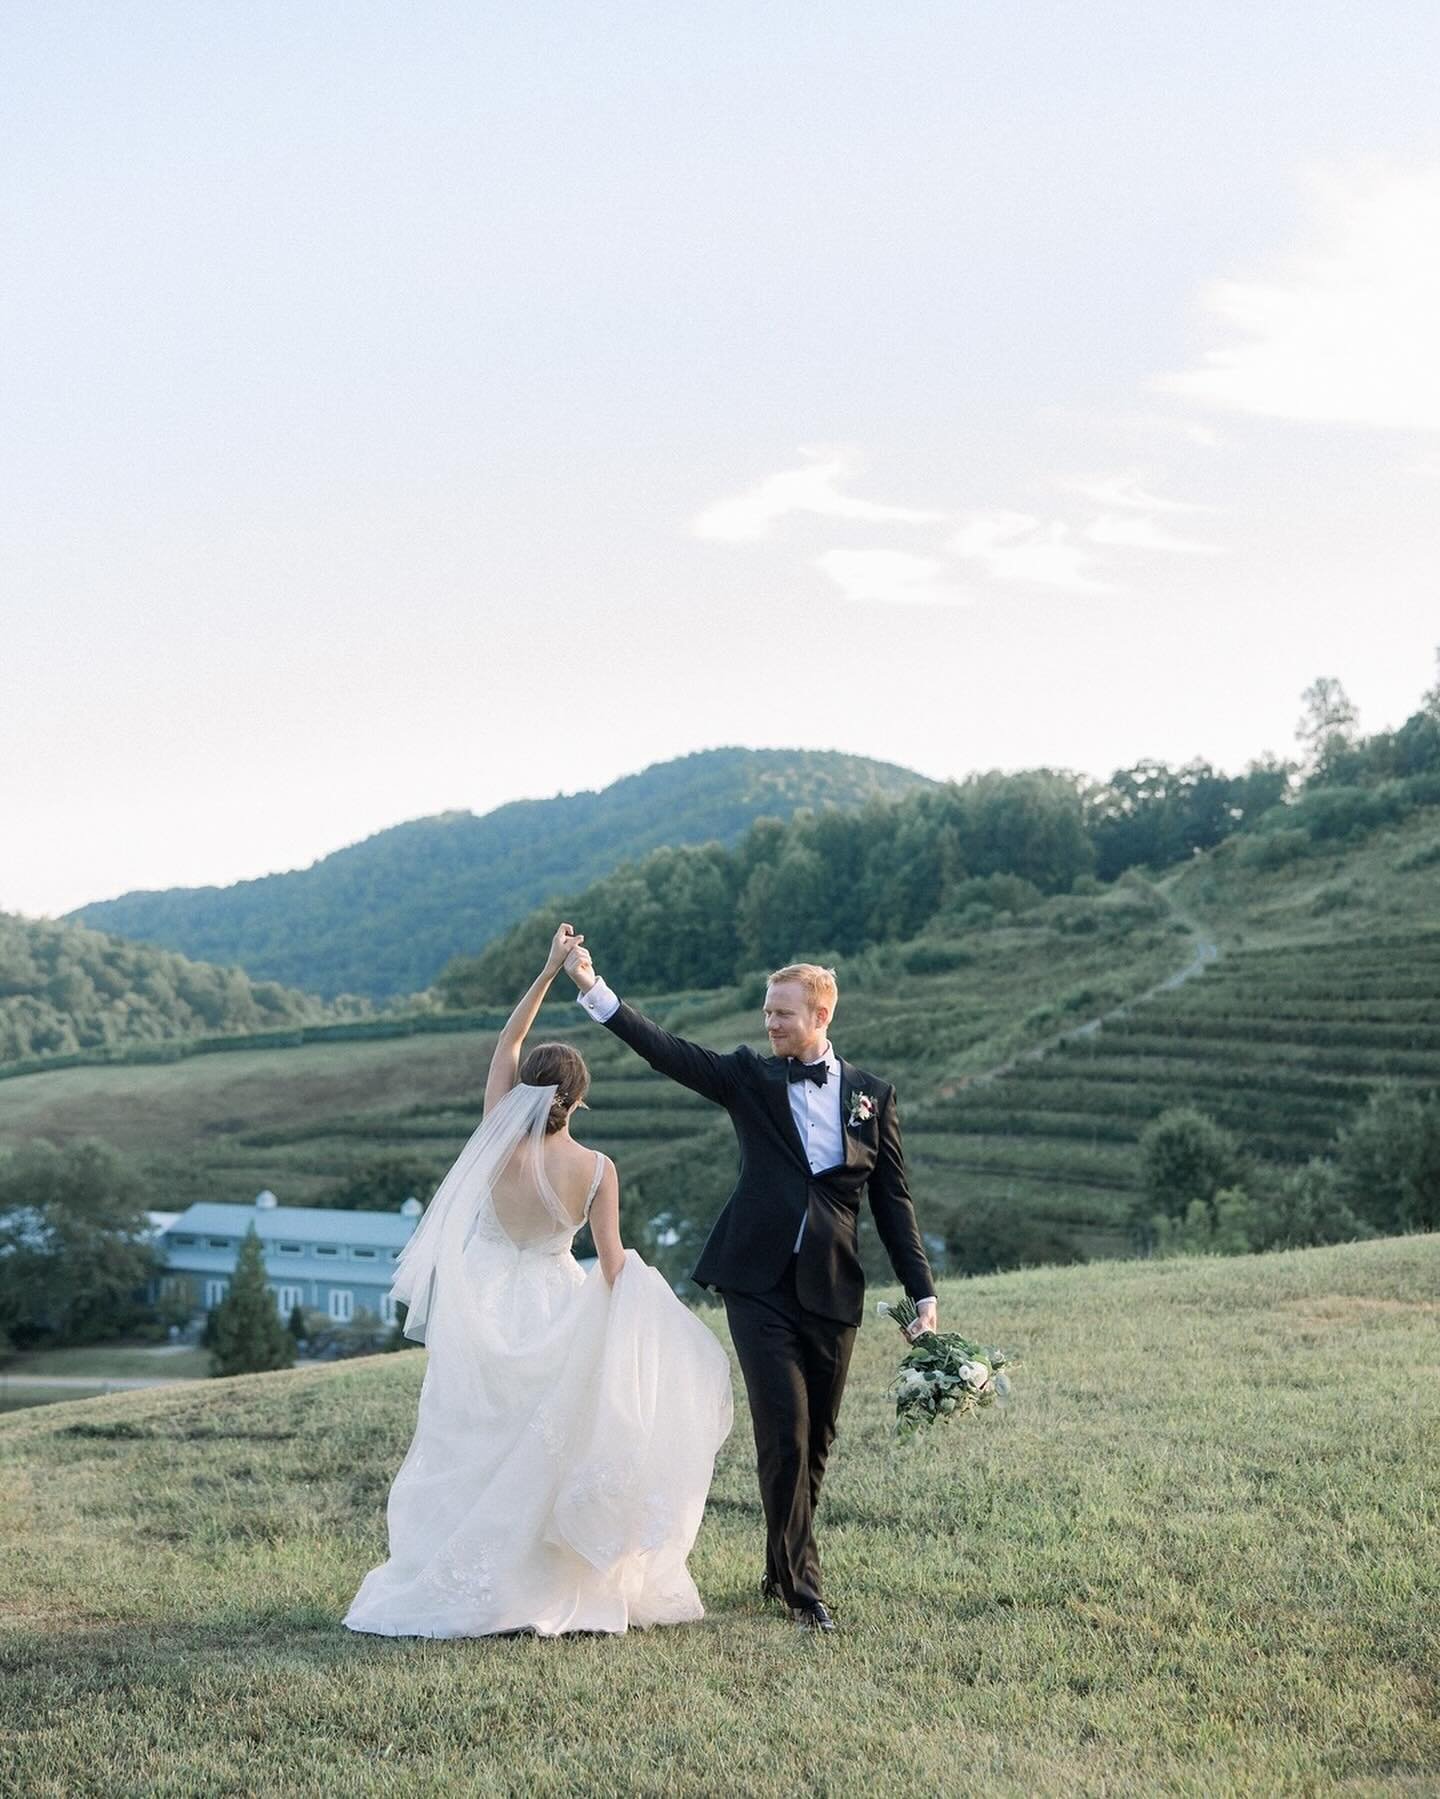 #🌅 I just love the views at Mountain and Vine Winery! 
⠀⠀⠀⠀⠀⠀⠀⠀⠀
When the couple heads to the top of the hill at sunset, the light is magical. And they can look below at the reception site and feel so loved knowing all their favorite people on earth